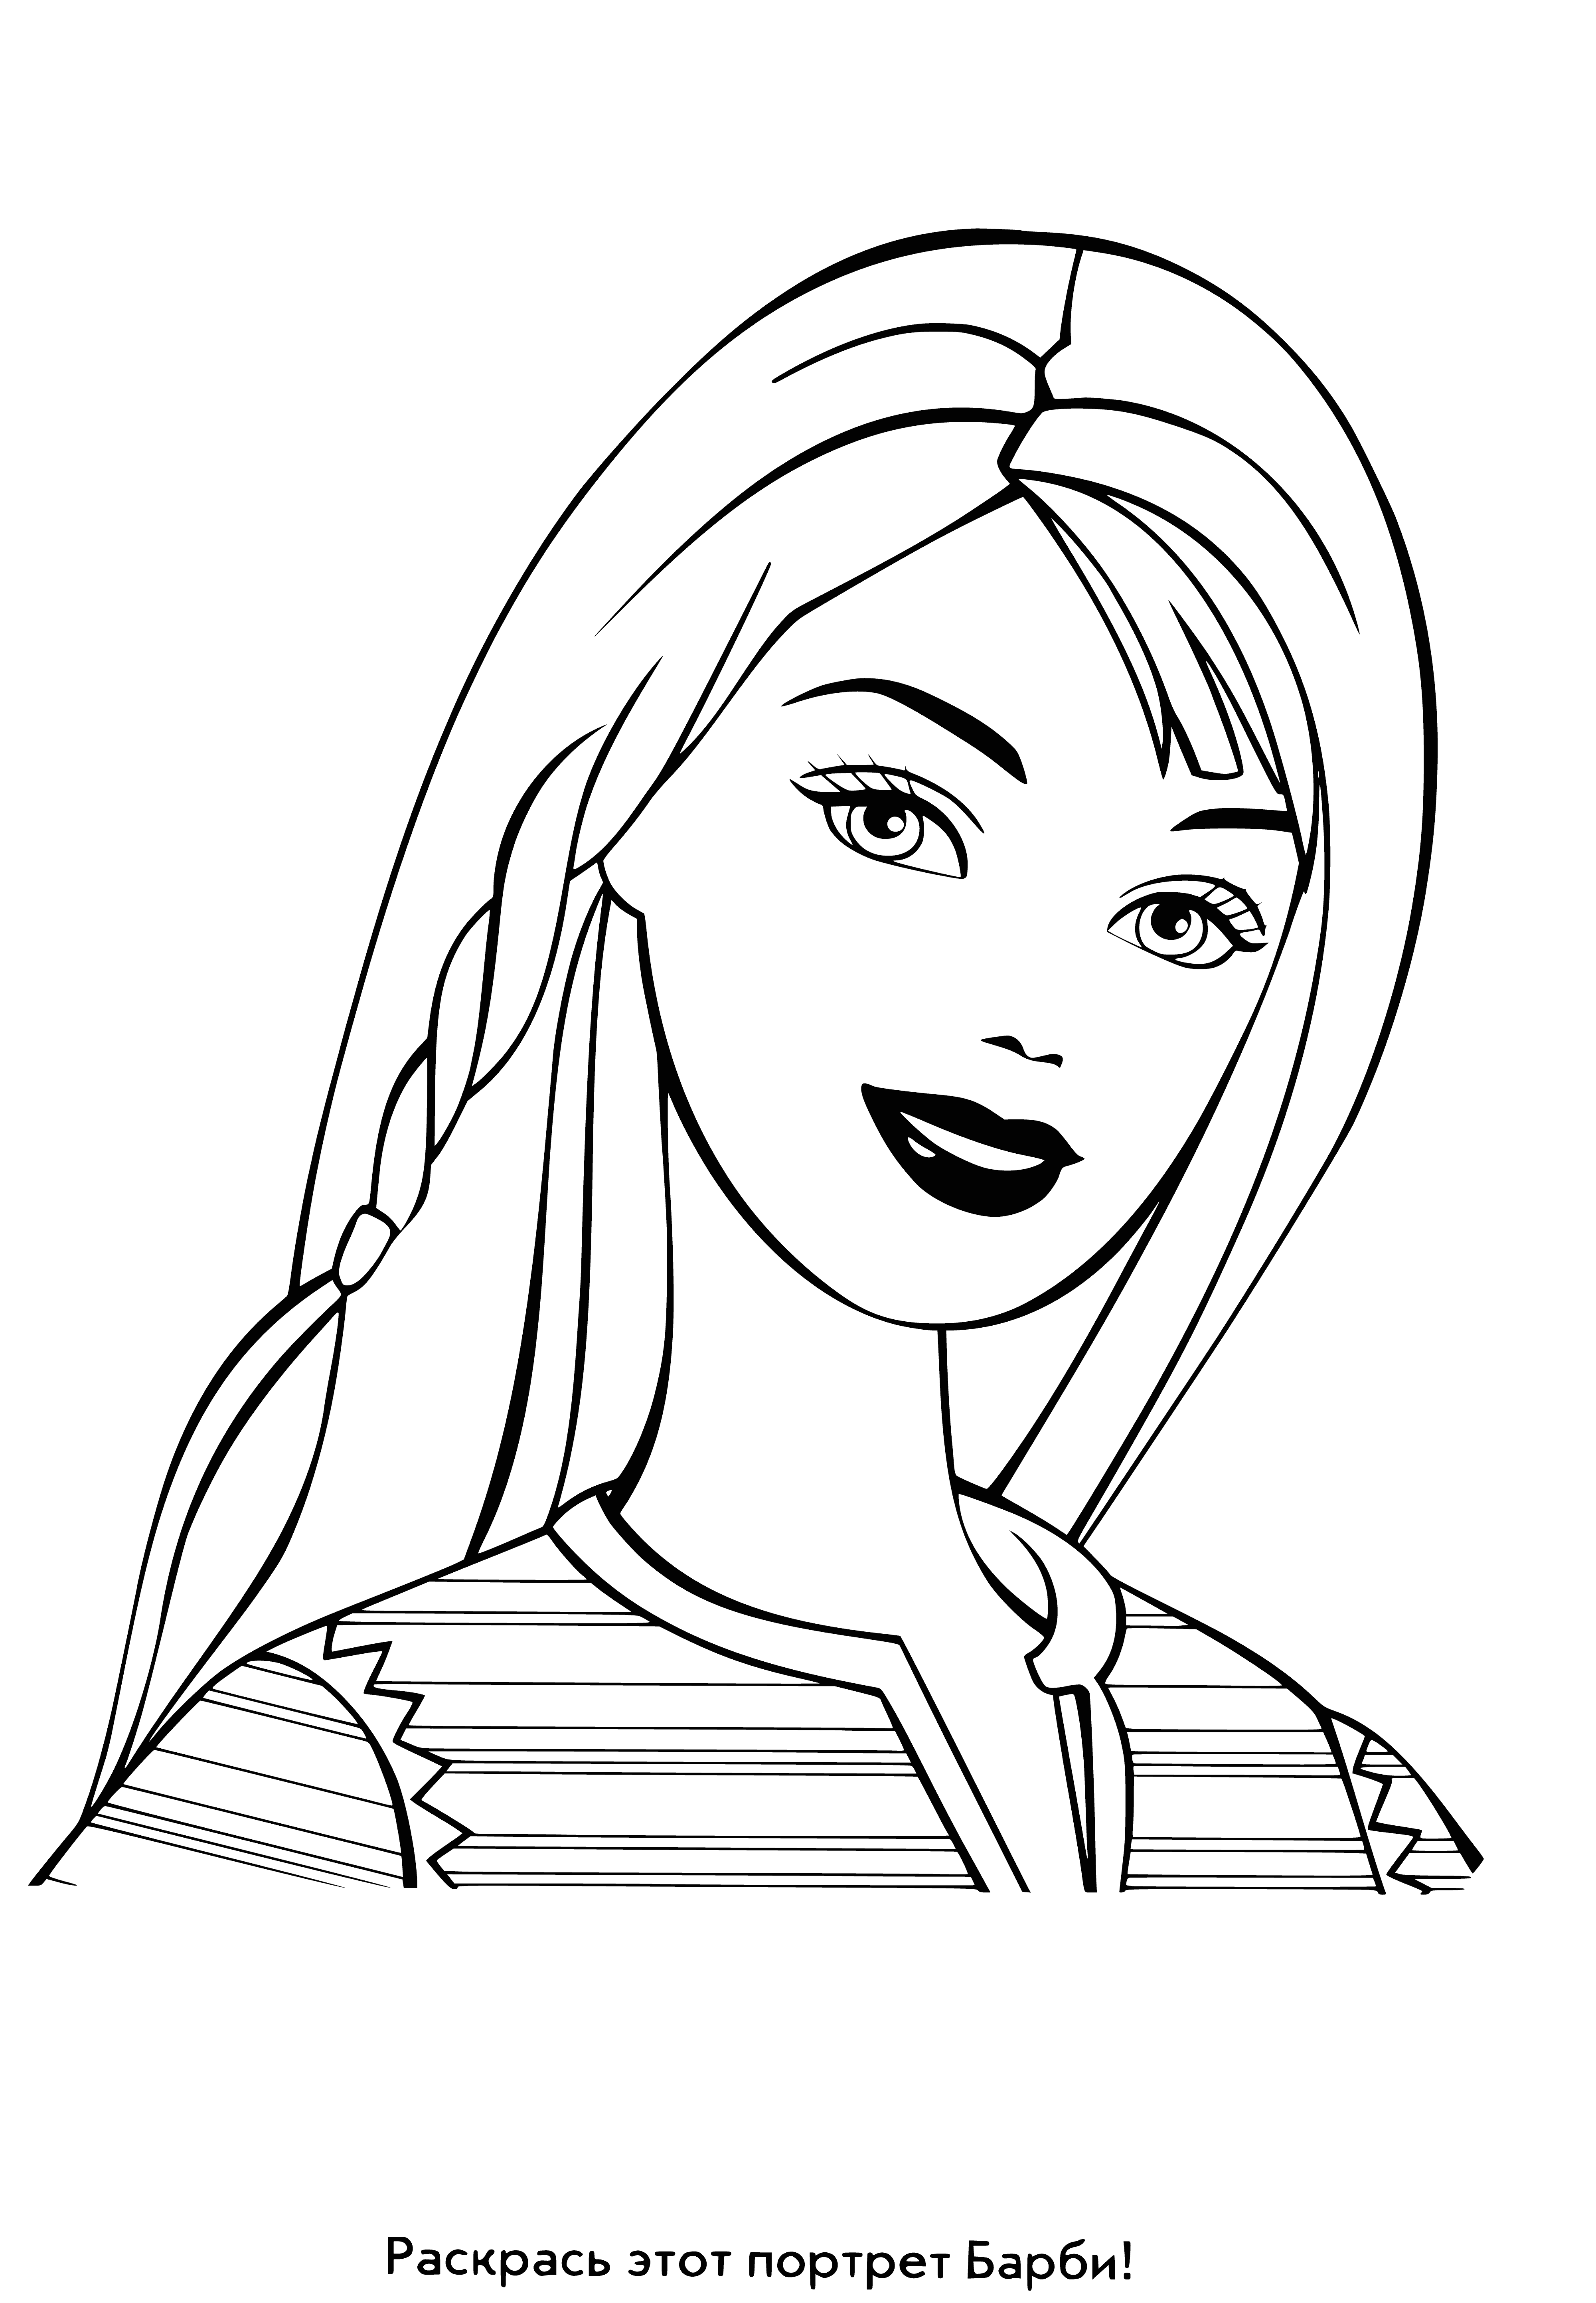 coloring page: Barbie coloring page with blonde hair, pink lips, defined eyebrows, blue eyes, and long lashes. Perfect for kids to get creative!